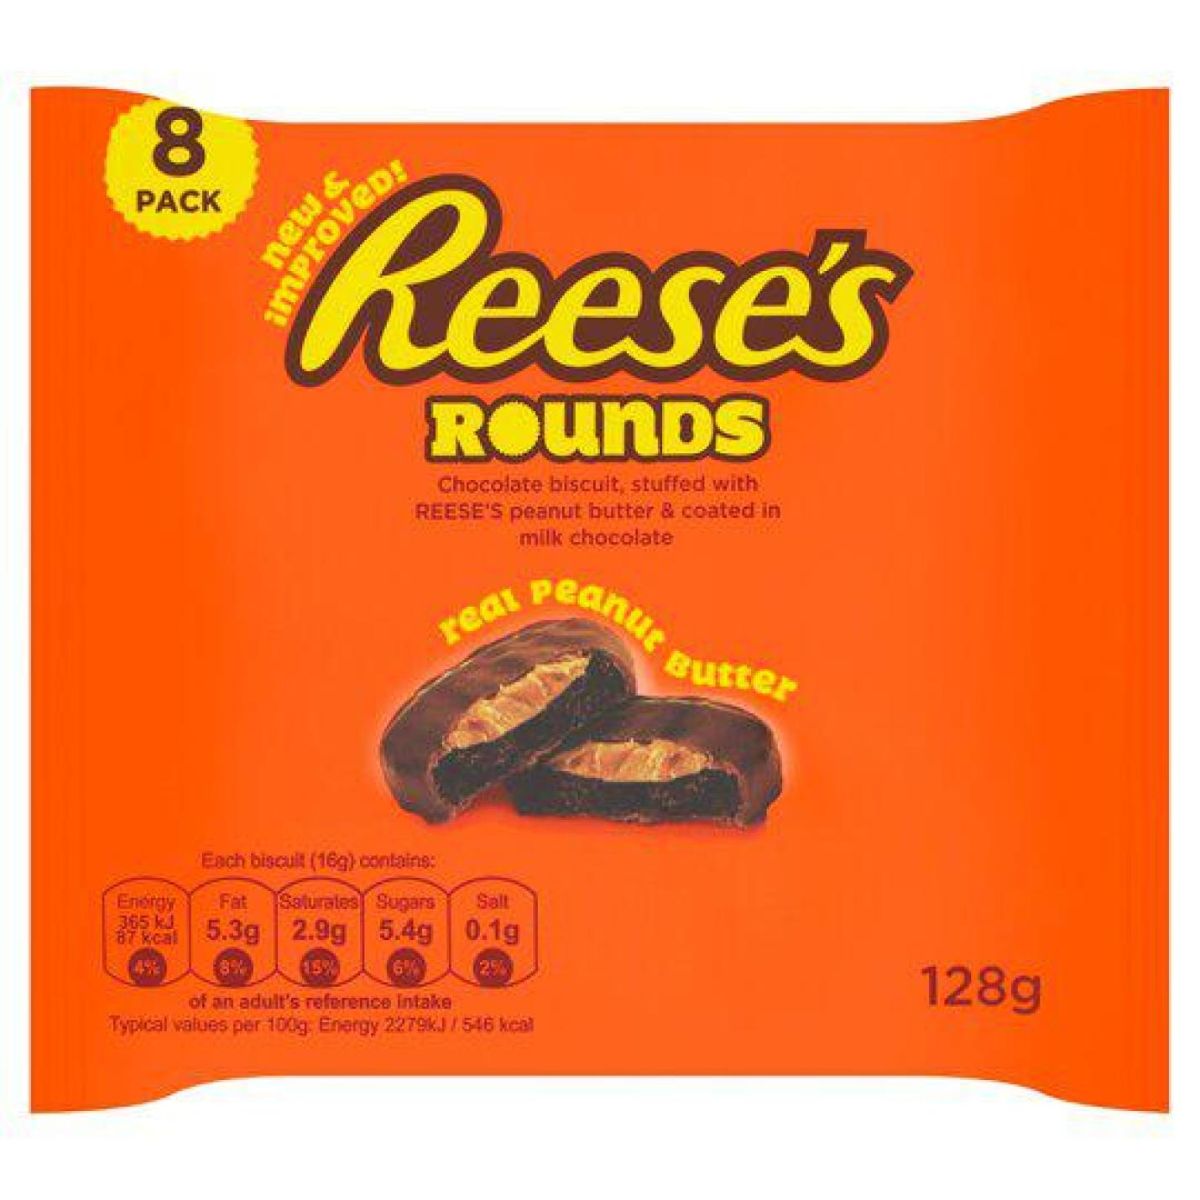 A package of Reese - Rounds Chocolate Biscuit & Peanut Butter - 8 Pack (128g).